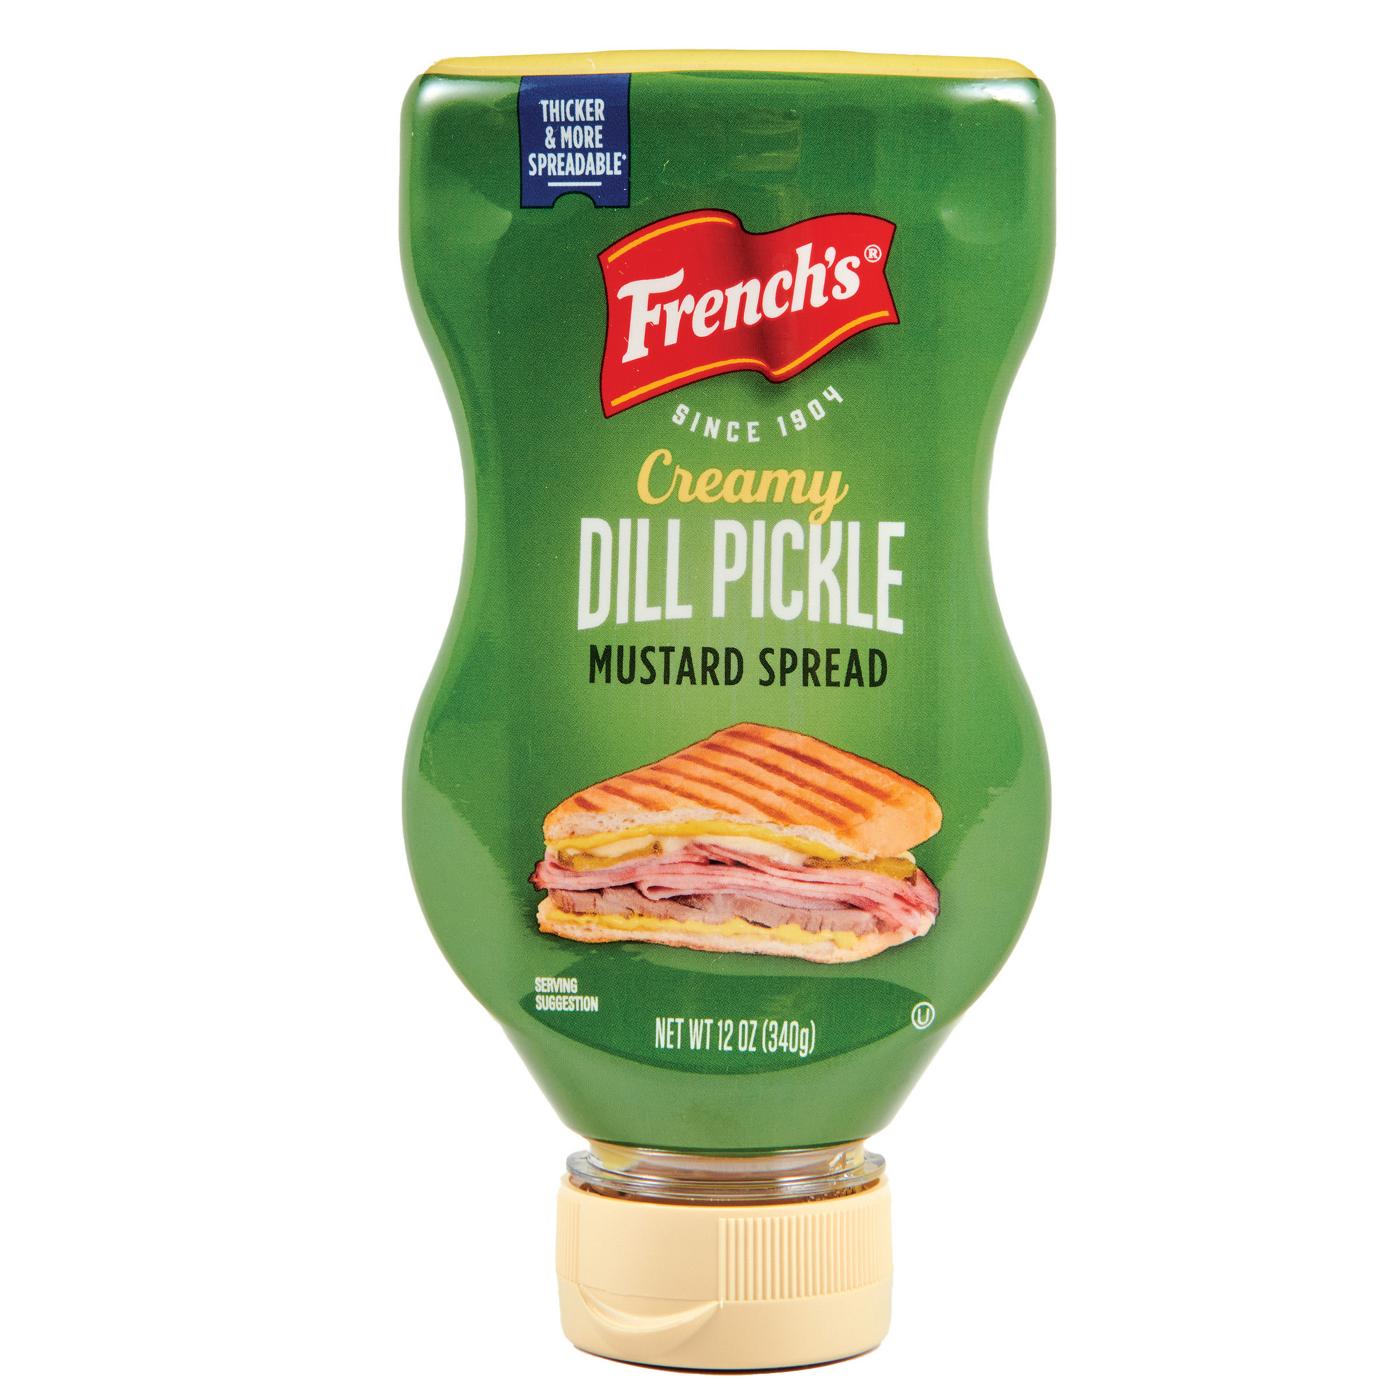 French's Creamy Dill Pickle Mustard Spread; image 1 of 9